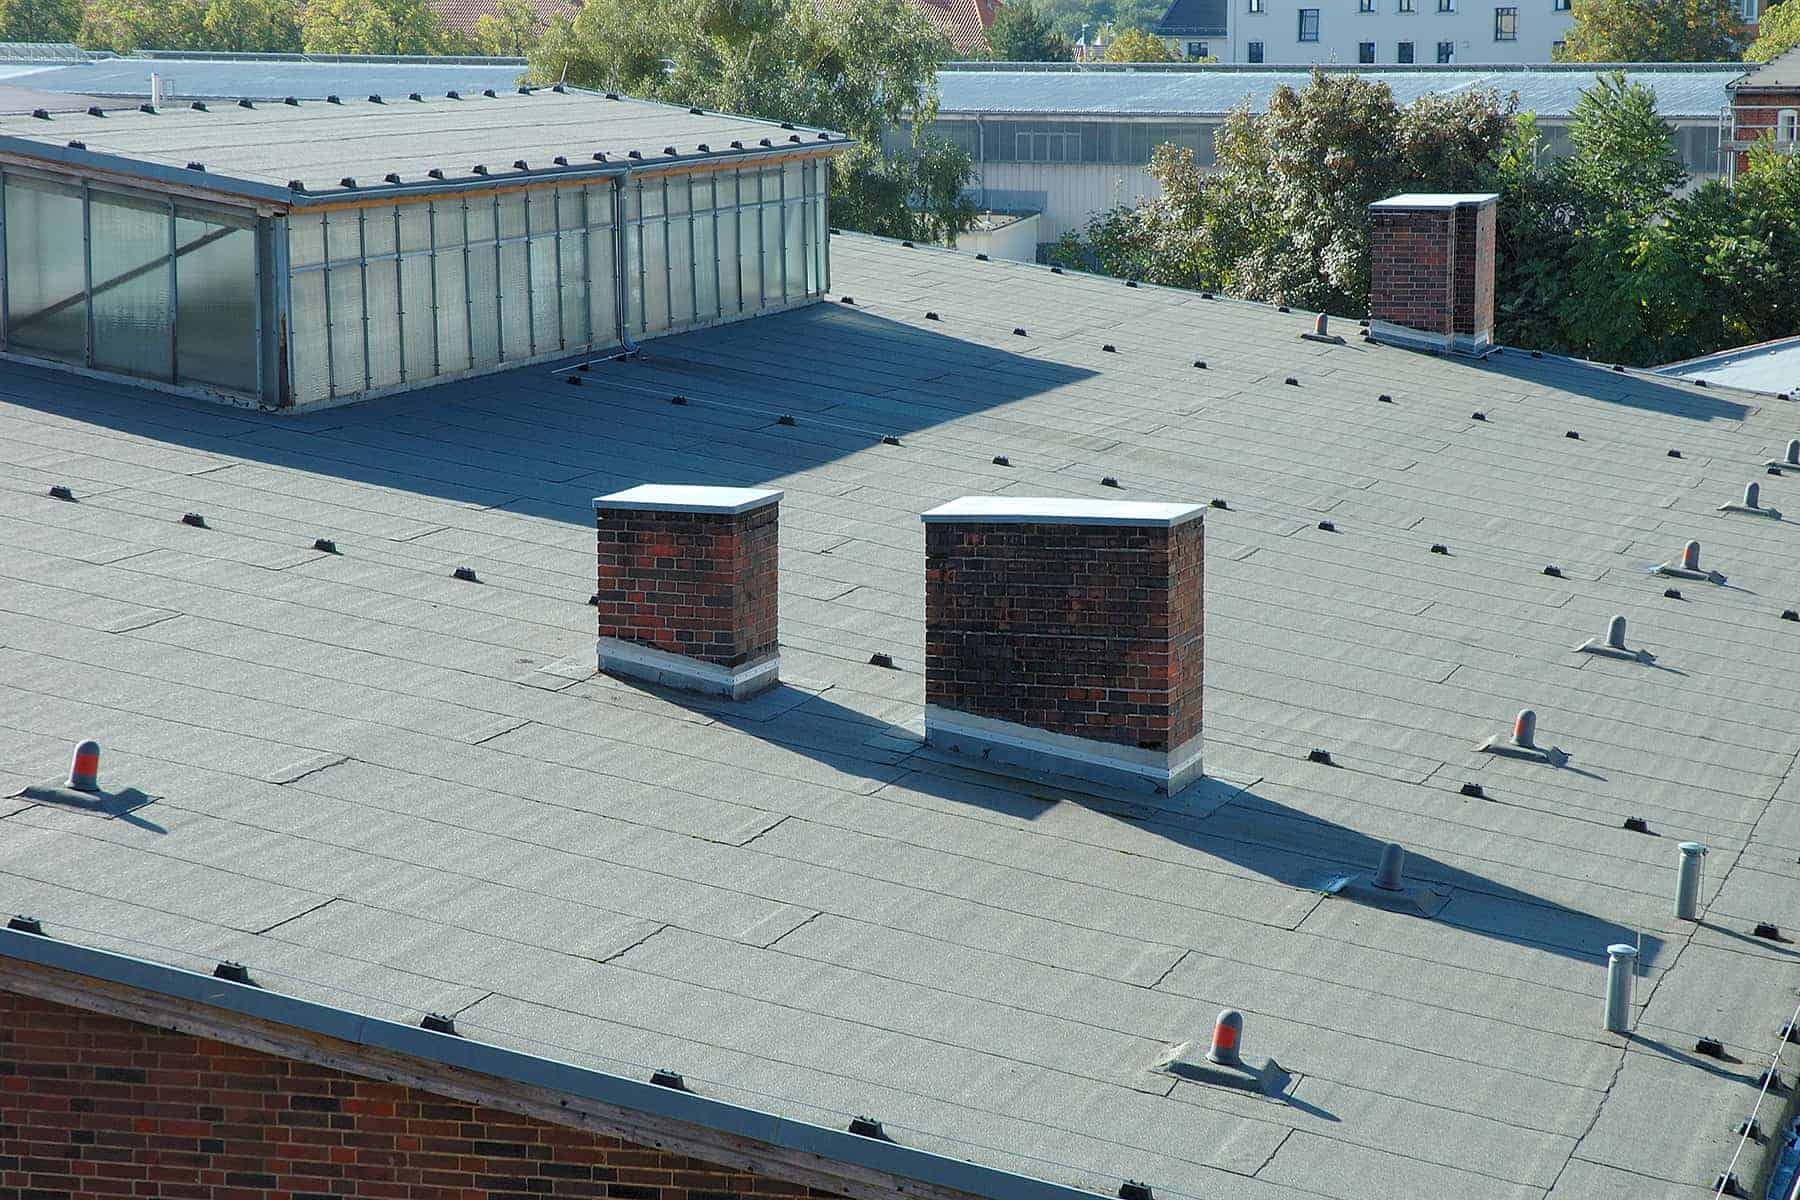 How Do You Service a Flat Roof?